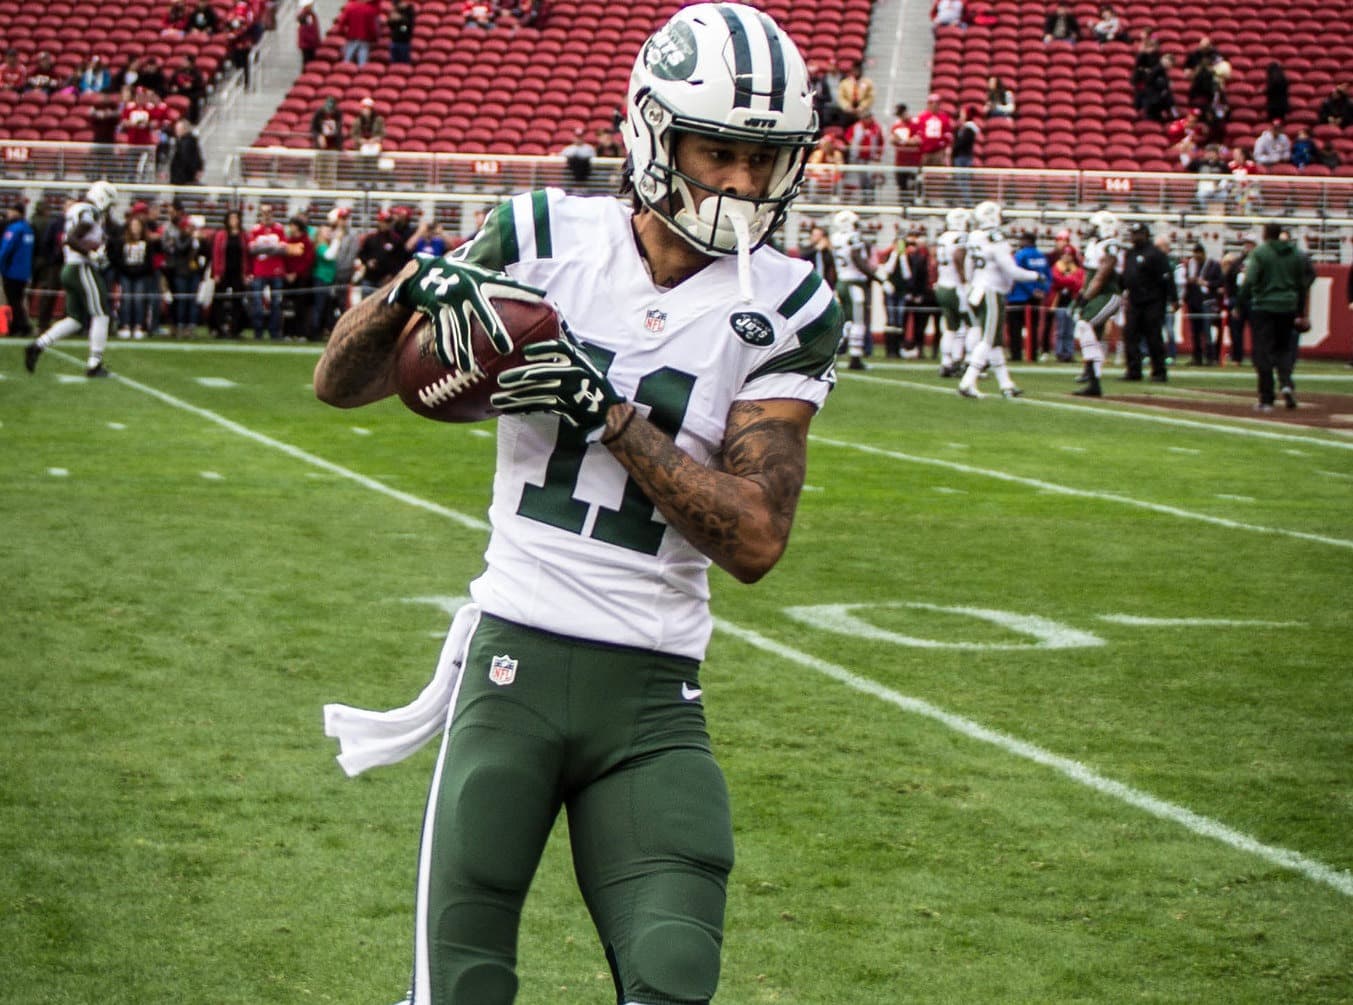 NY Jets Wide Receiver Robby Anderson. Photo Credit: Tom | Under Creative Commons License